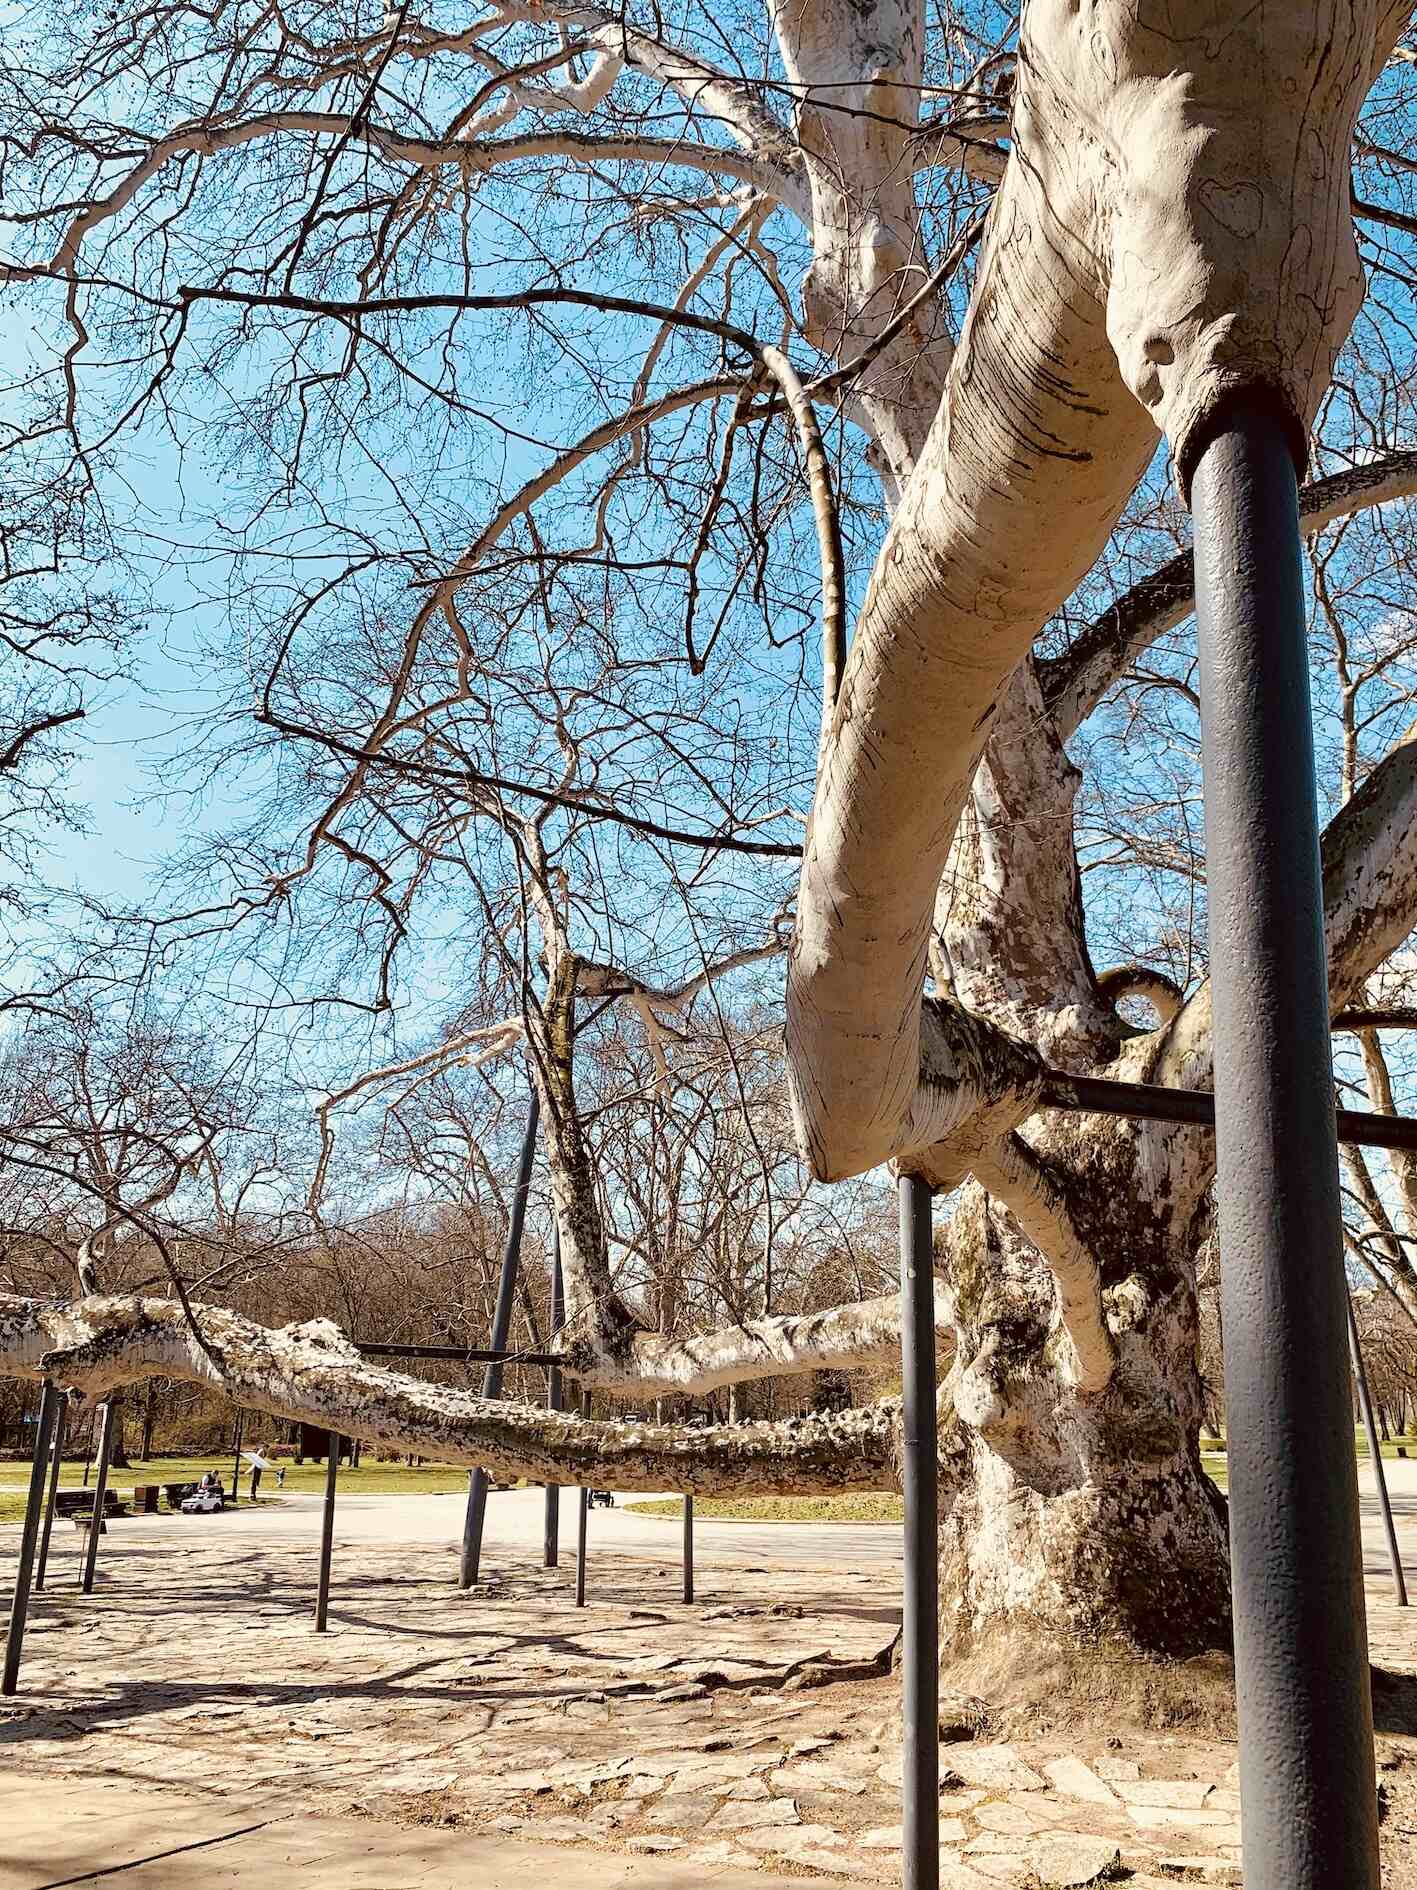 The London plane and its metal supportive poles Topcider Park Belgrade